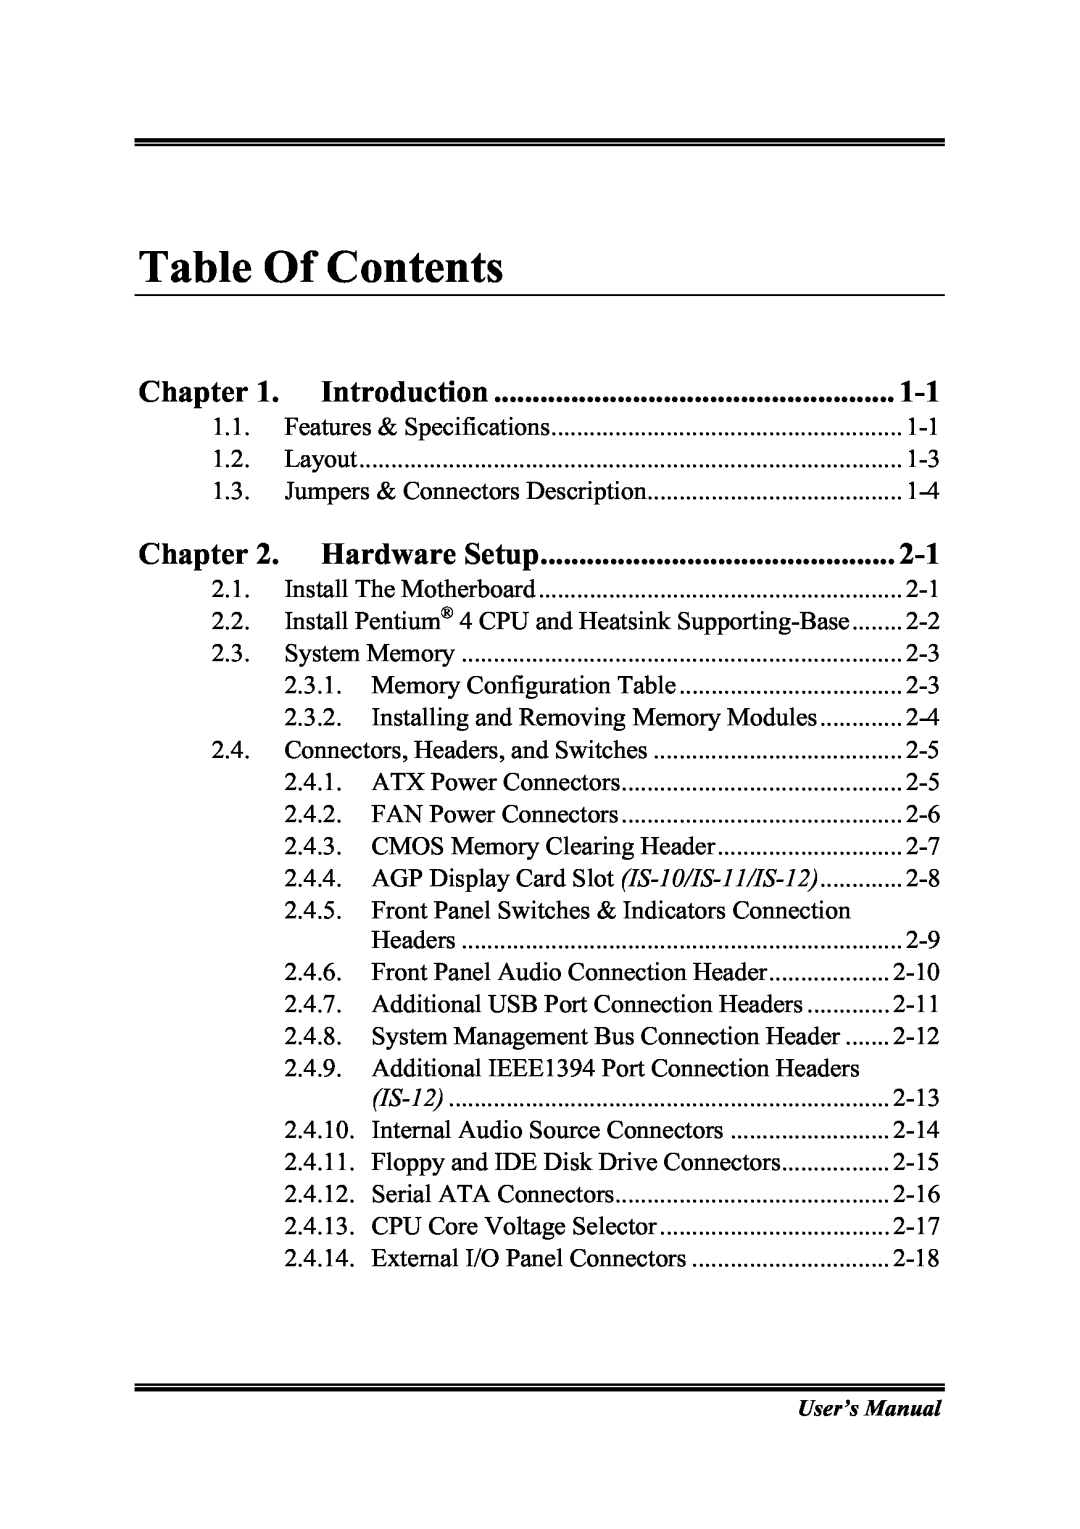 Abit IS-11, IS-12, IS-20, IS-10 user manual Chapter, Introduction, Hardware Setup, Table Of Contents 